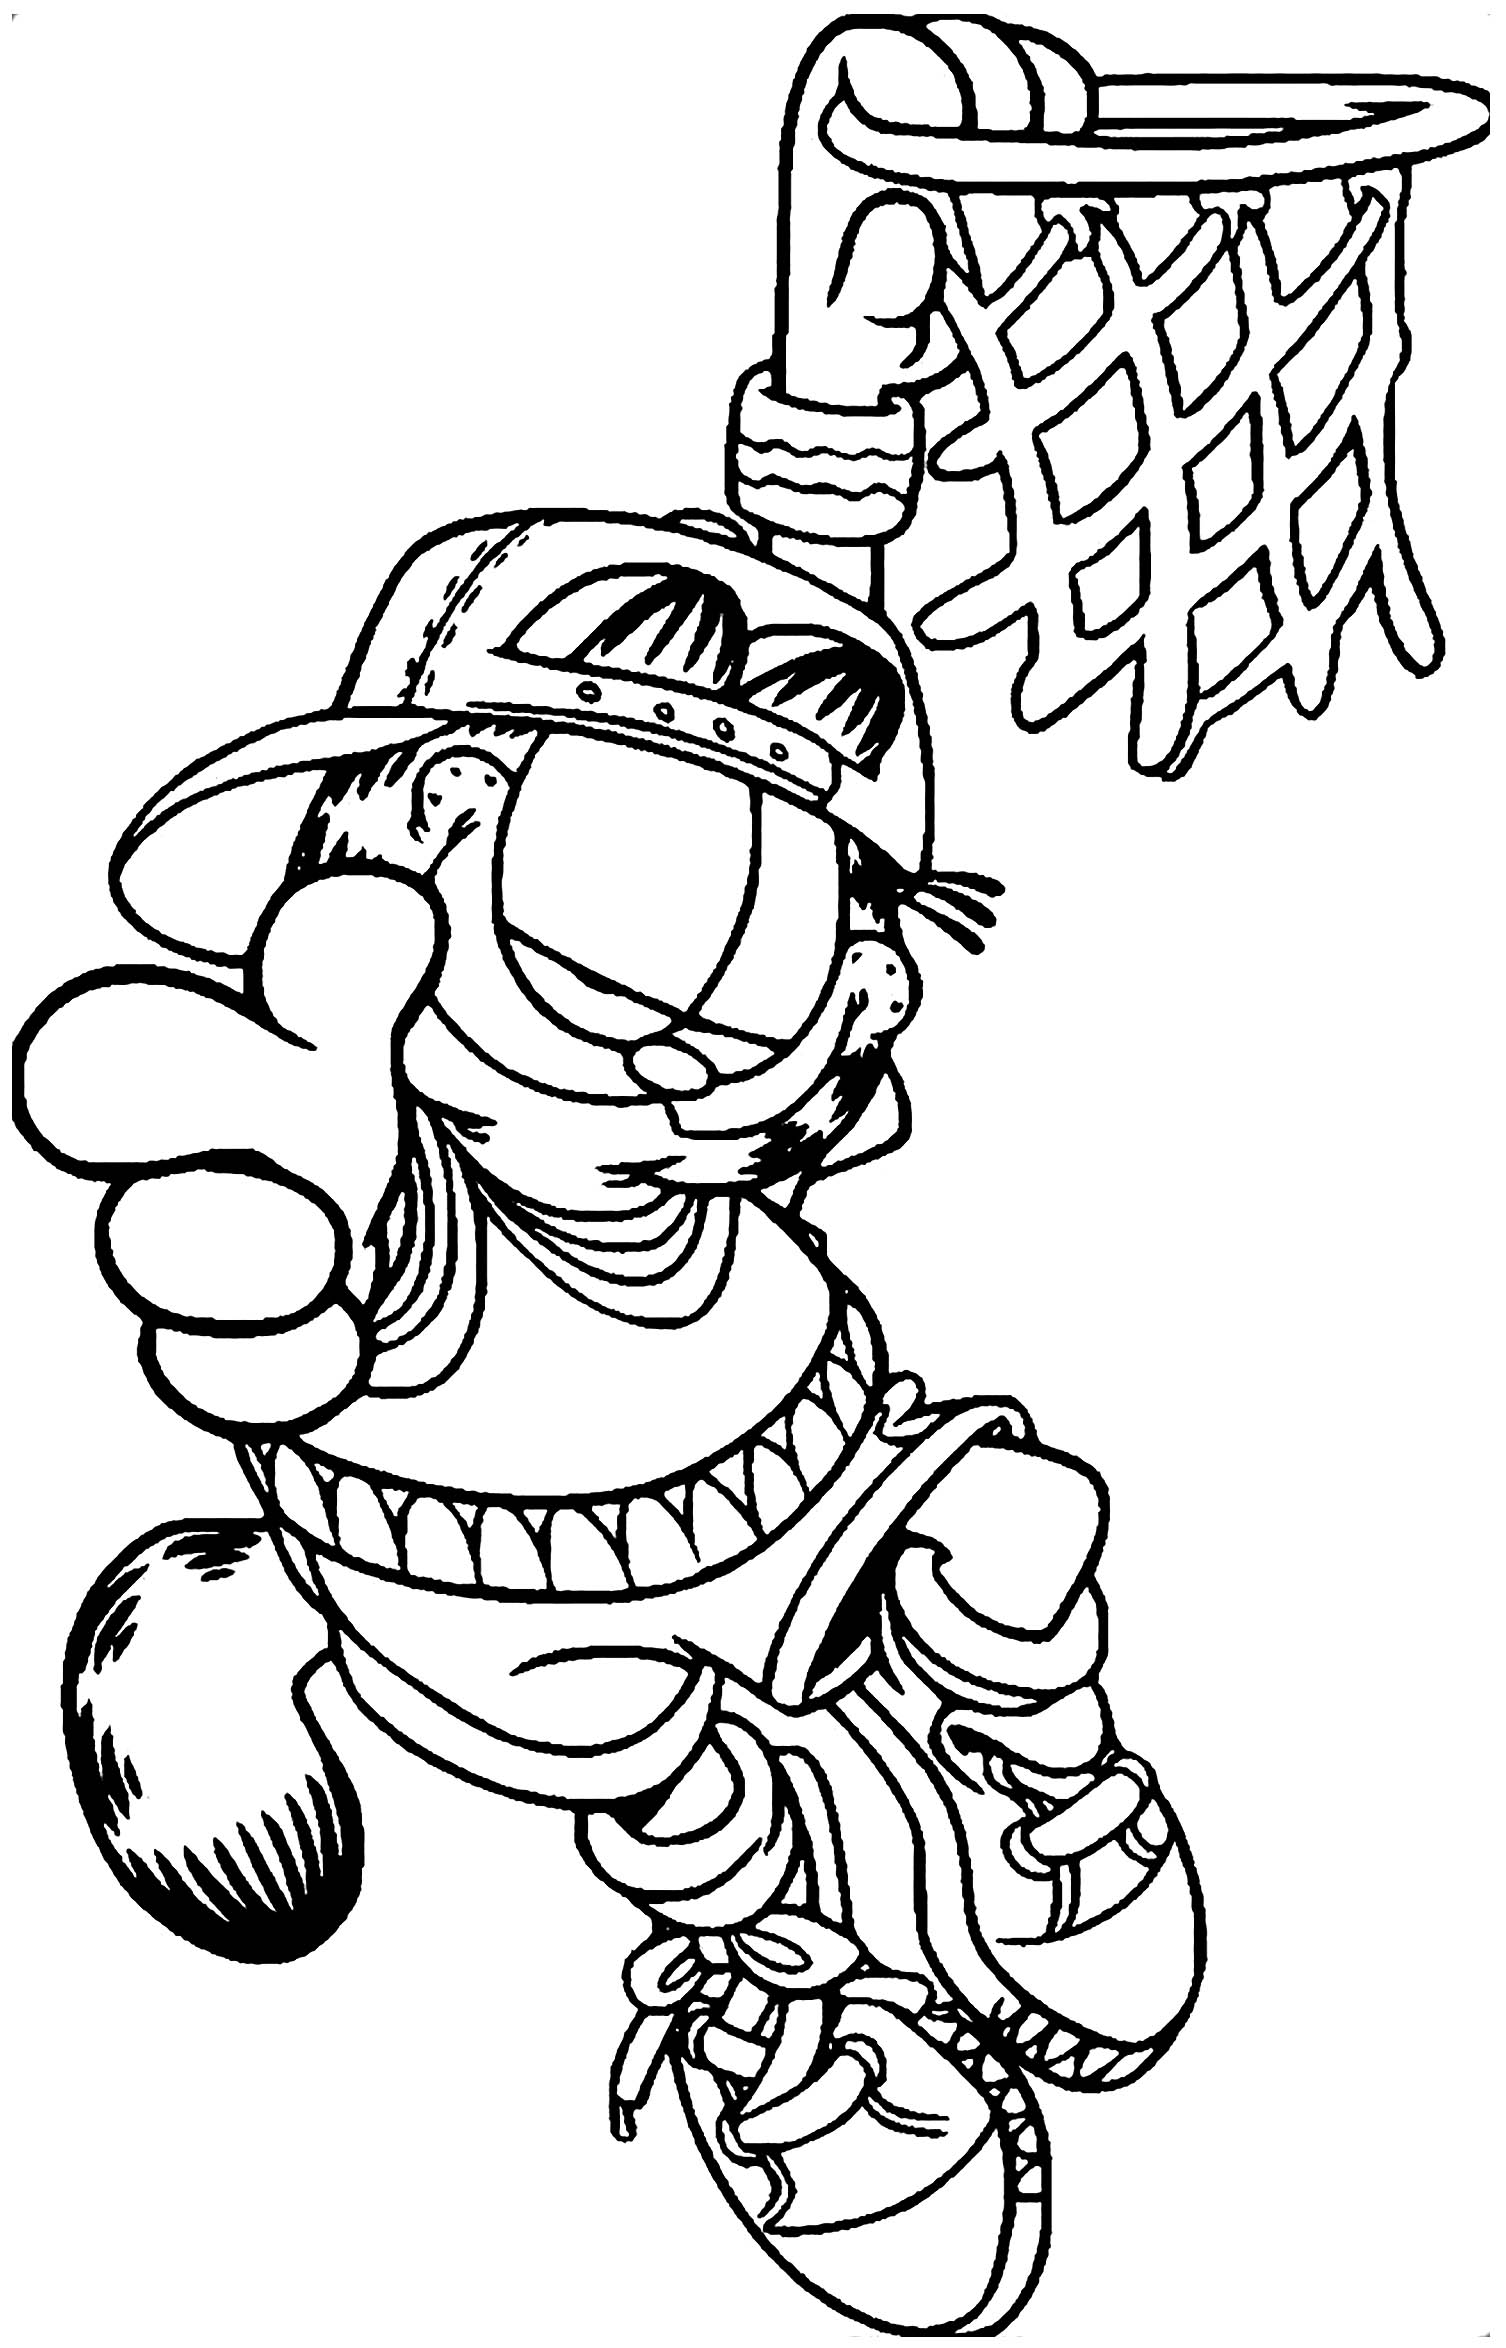 Garfield Playing Basketball Coloring Pages